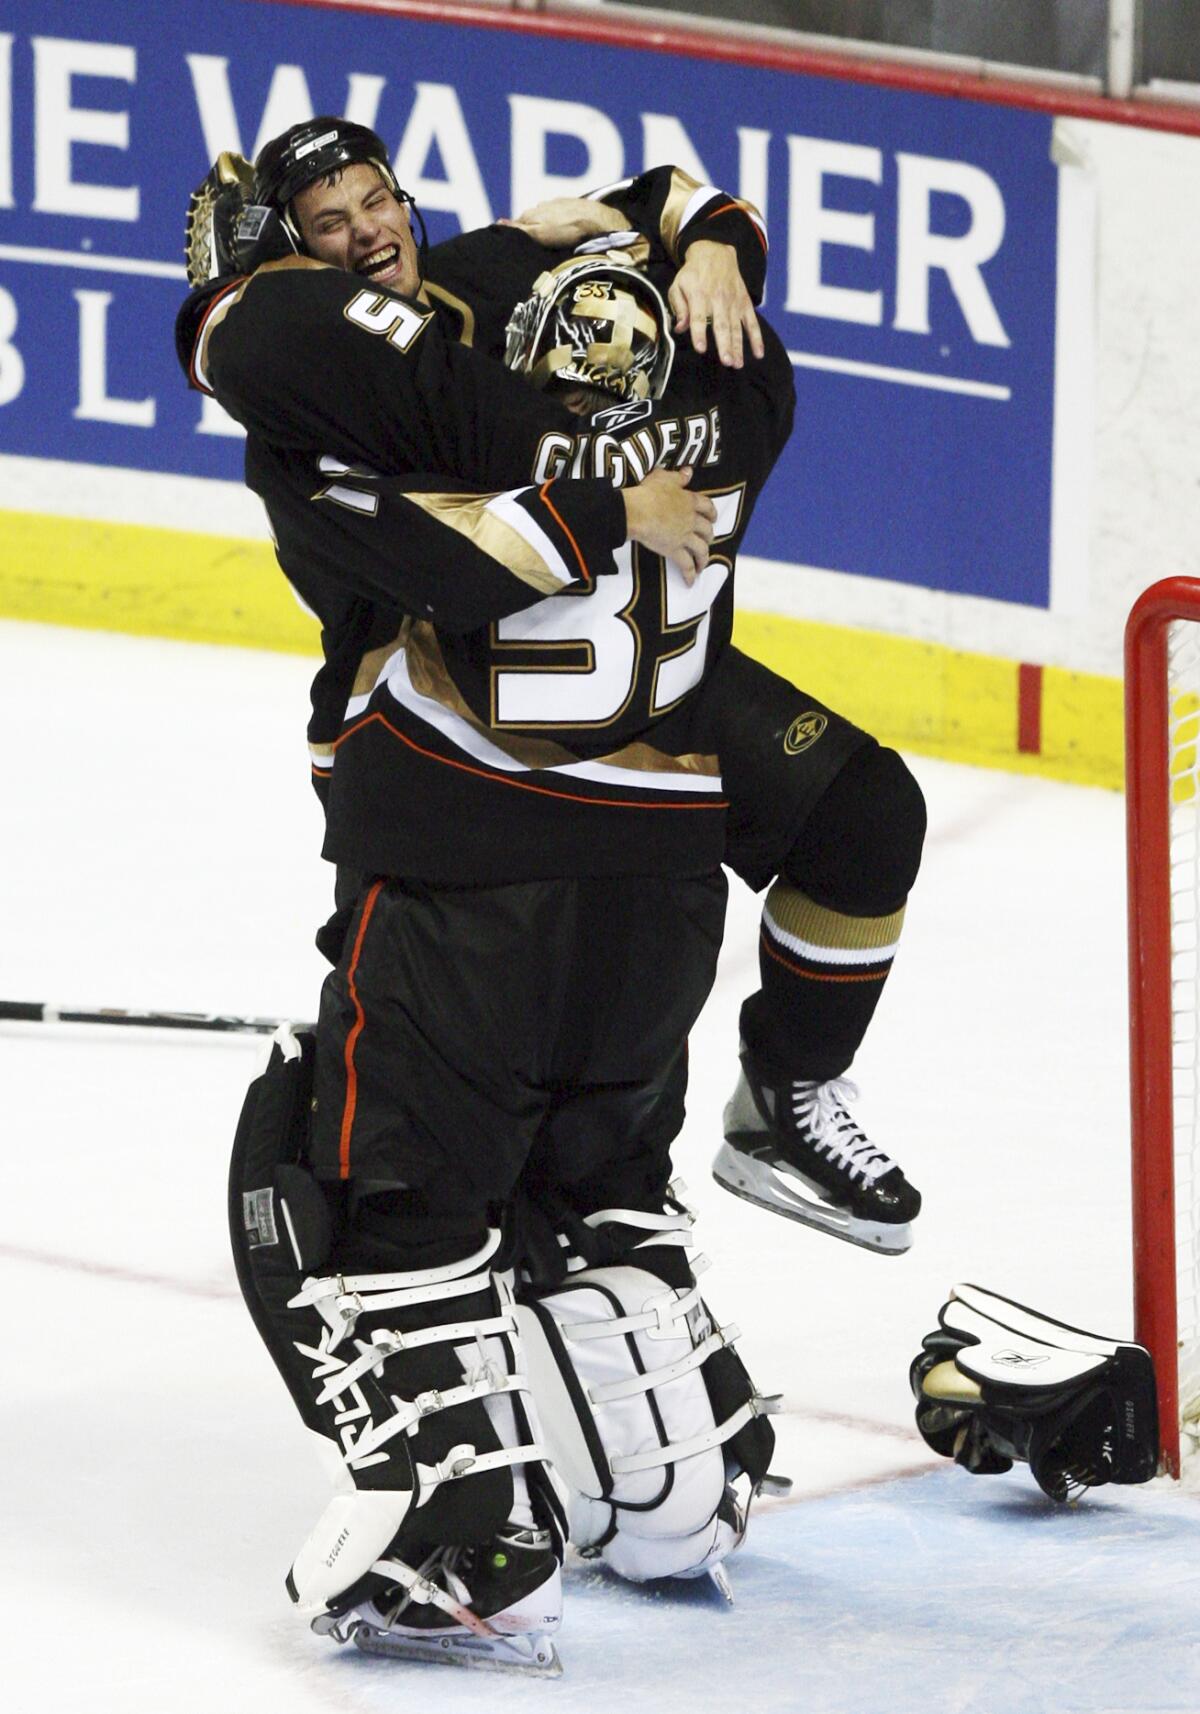 Ryan Getzlaf, left, jumps into the arms of Ducks goalie Jean Sebastian Giguere as they celebrate winning the 2007 Stanley Cup